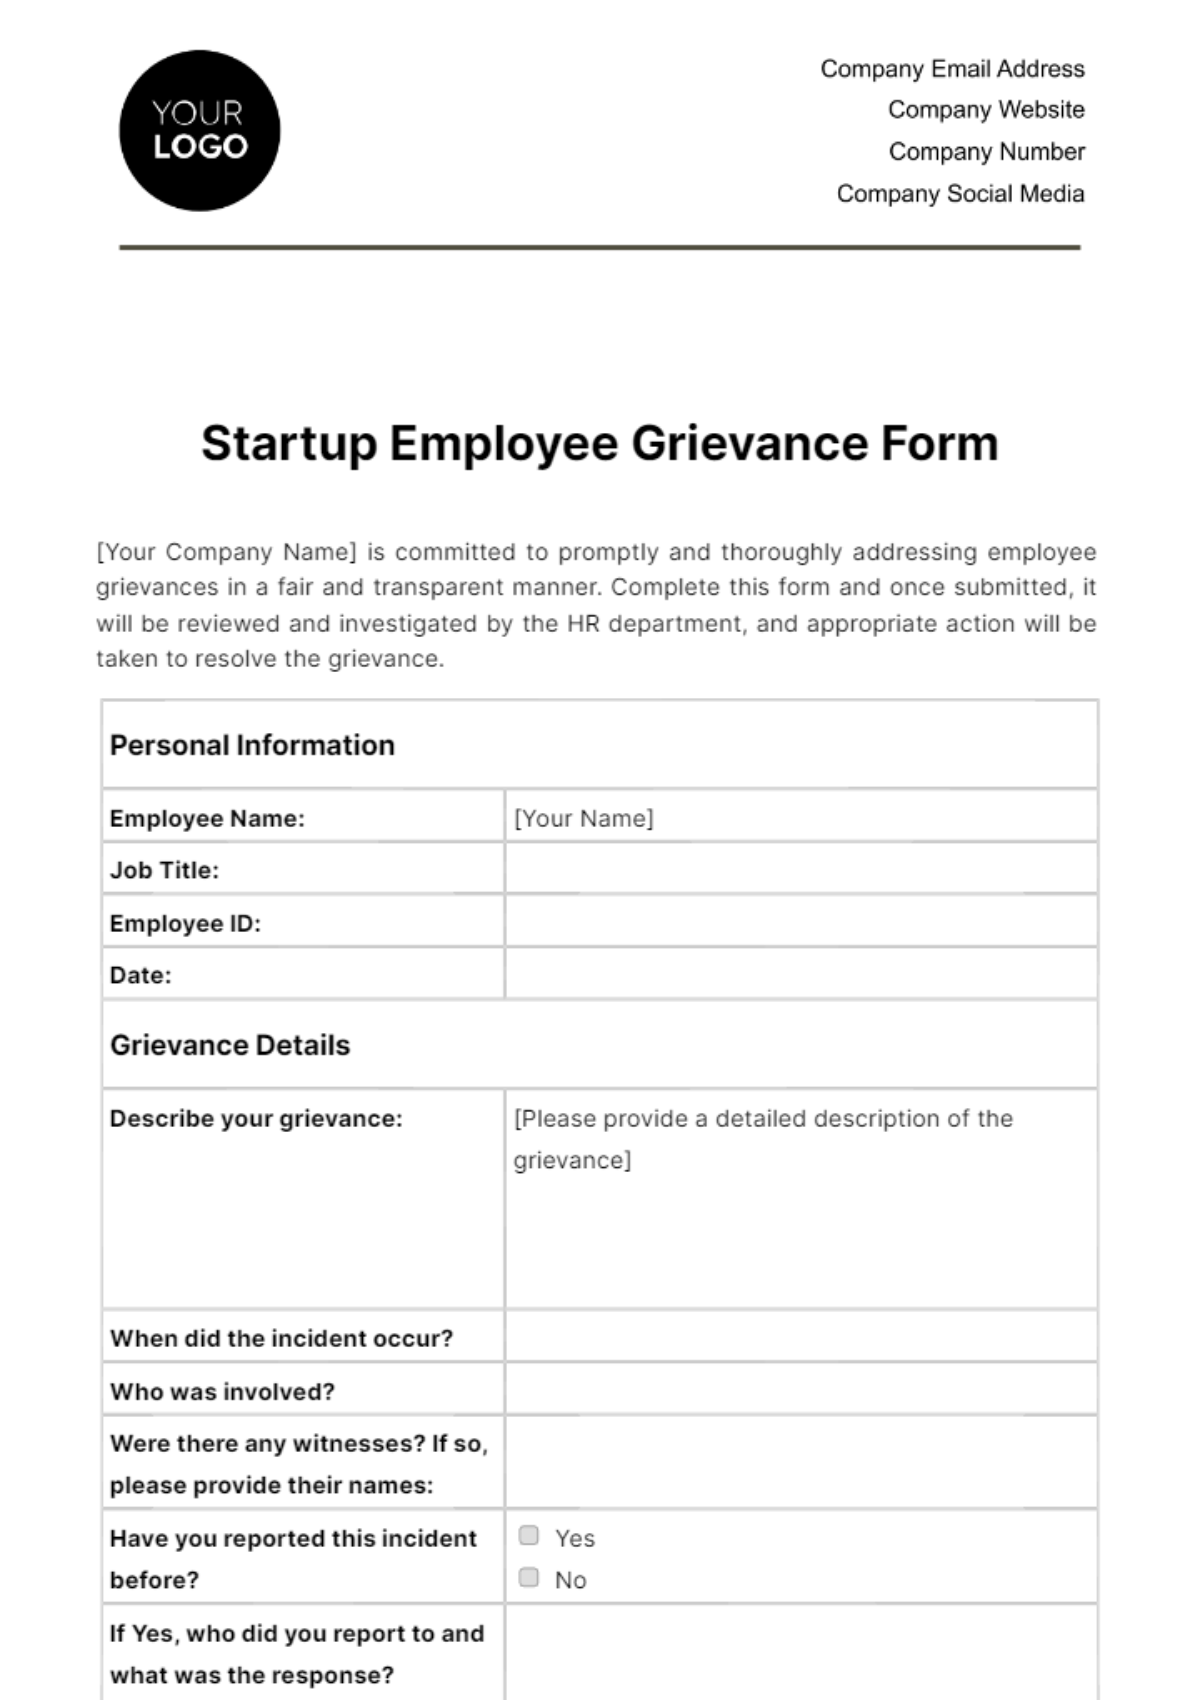 Startup Employee Grievance Form Template